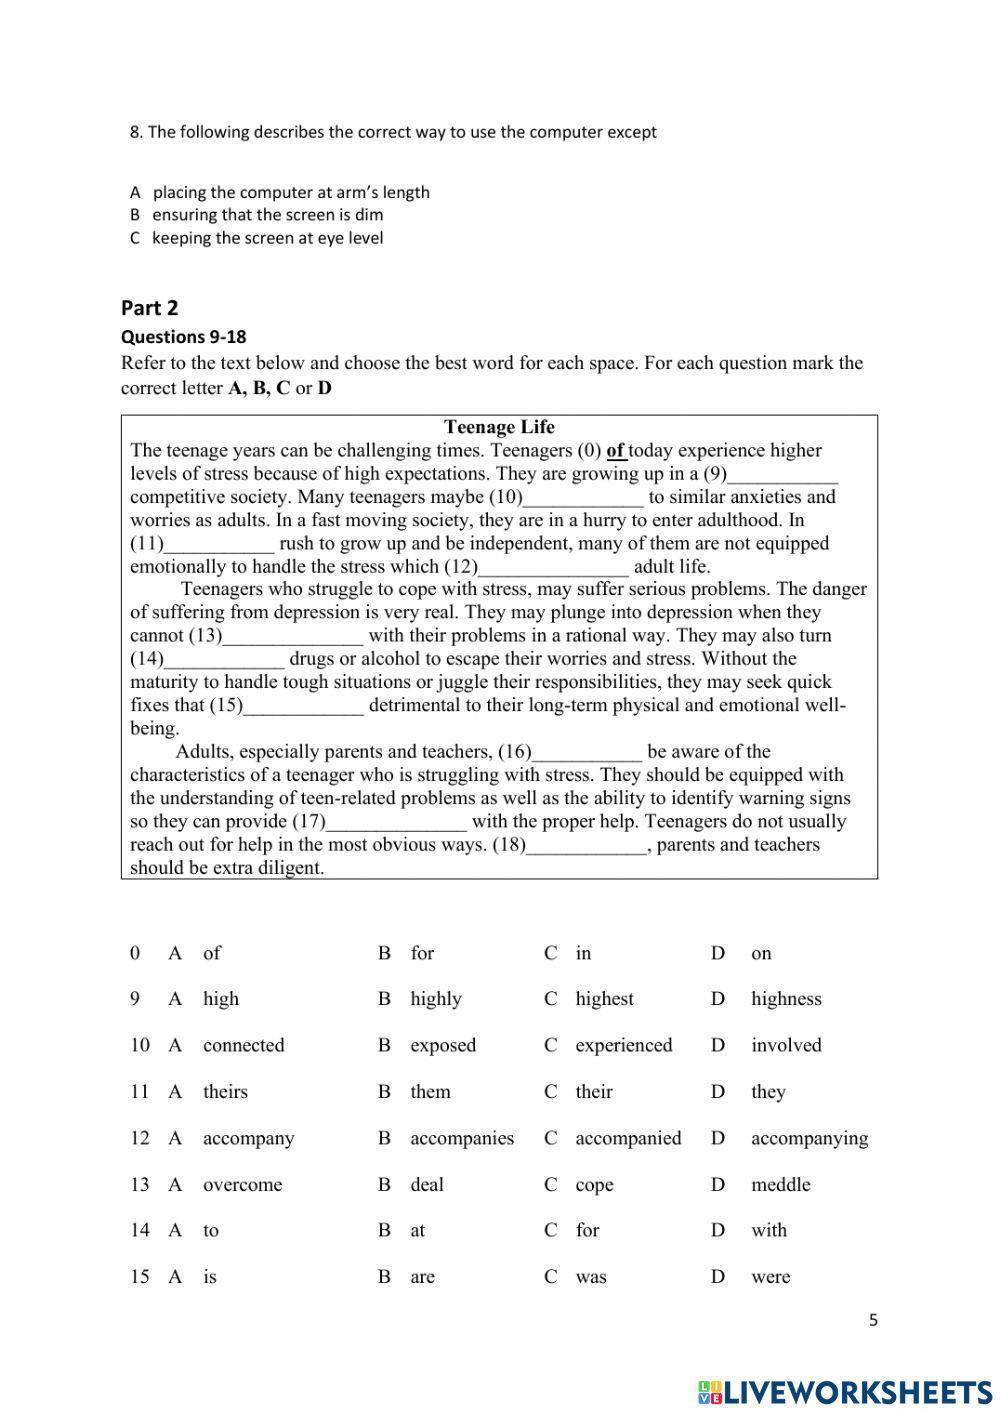 Reading & Use of English(Paper 1) Part 1-3